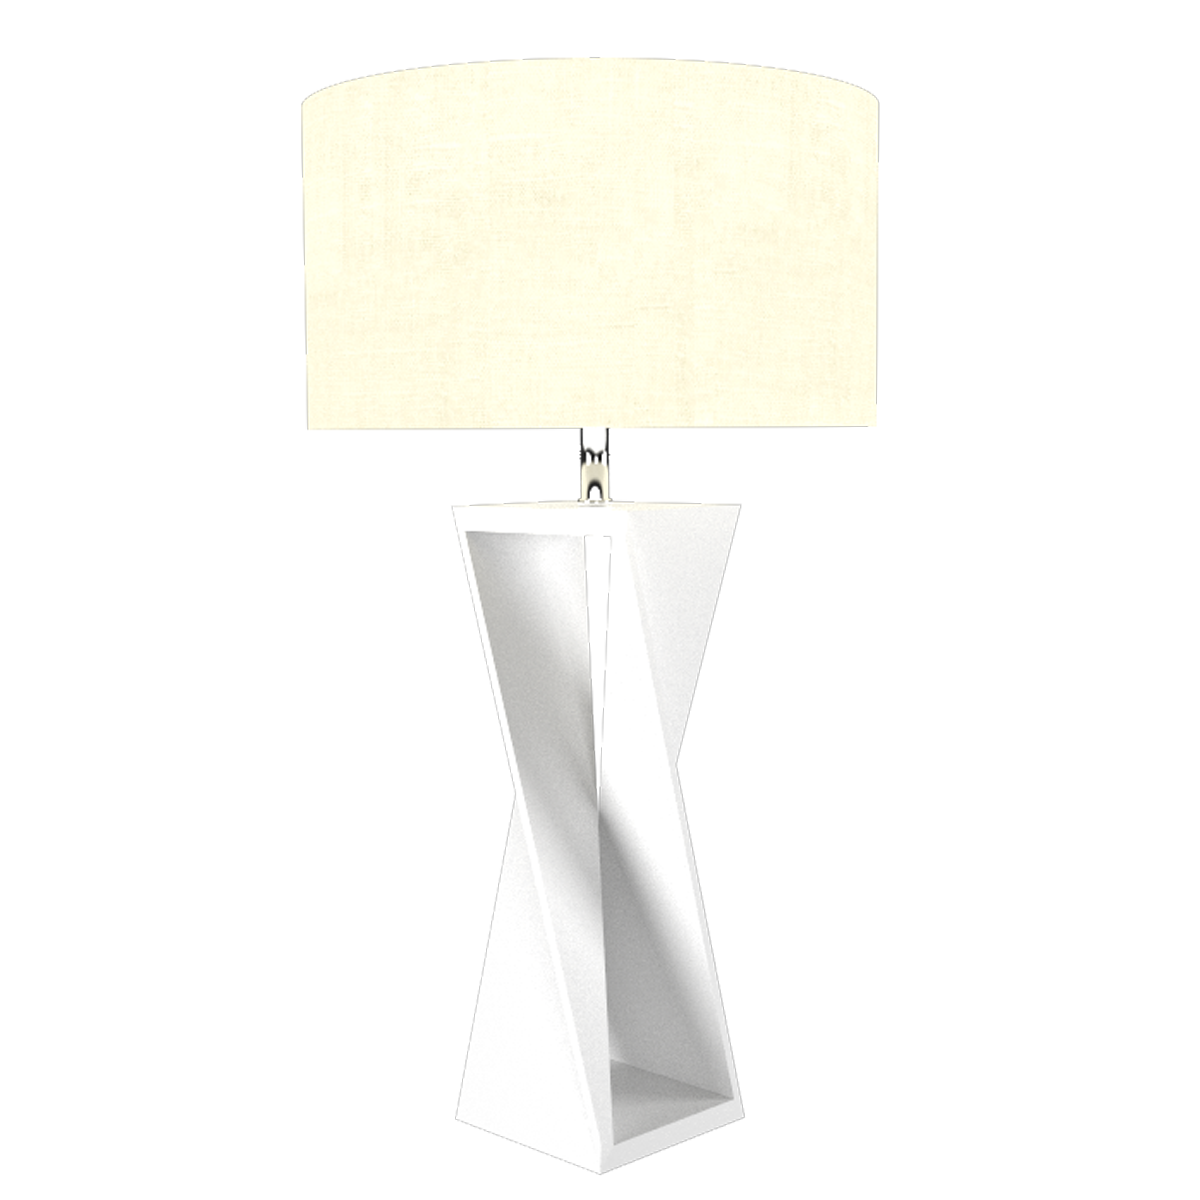 Spin Table Lamp 7044